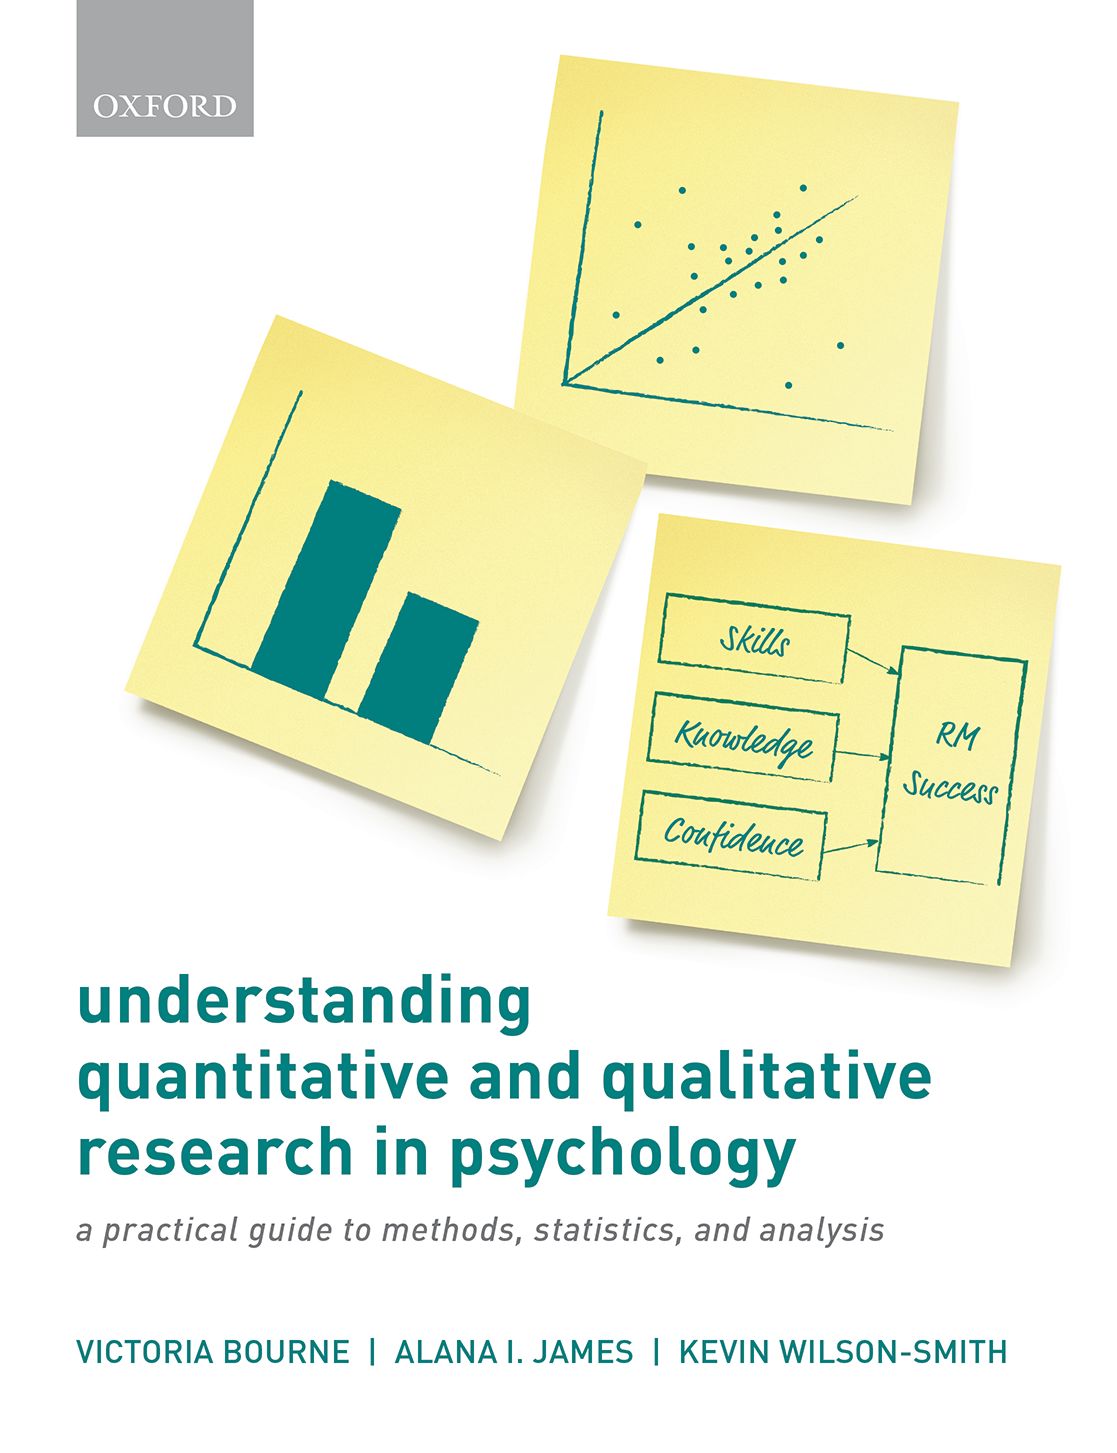 importance of quantitative research in psychology field